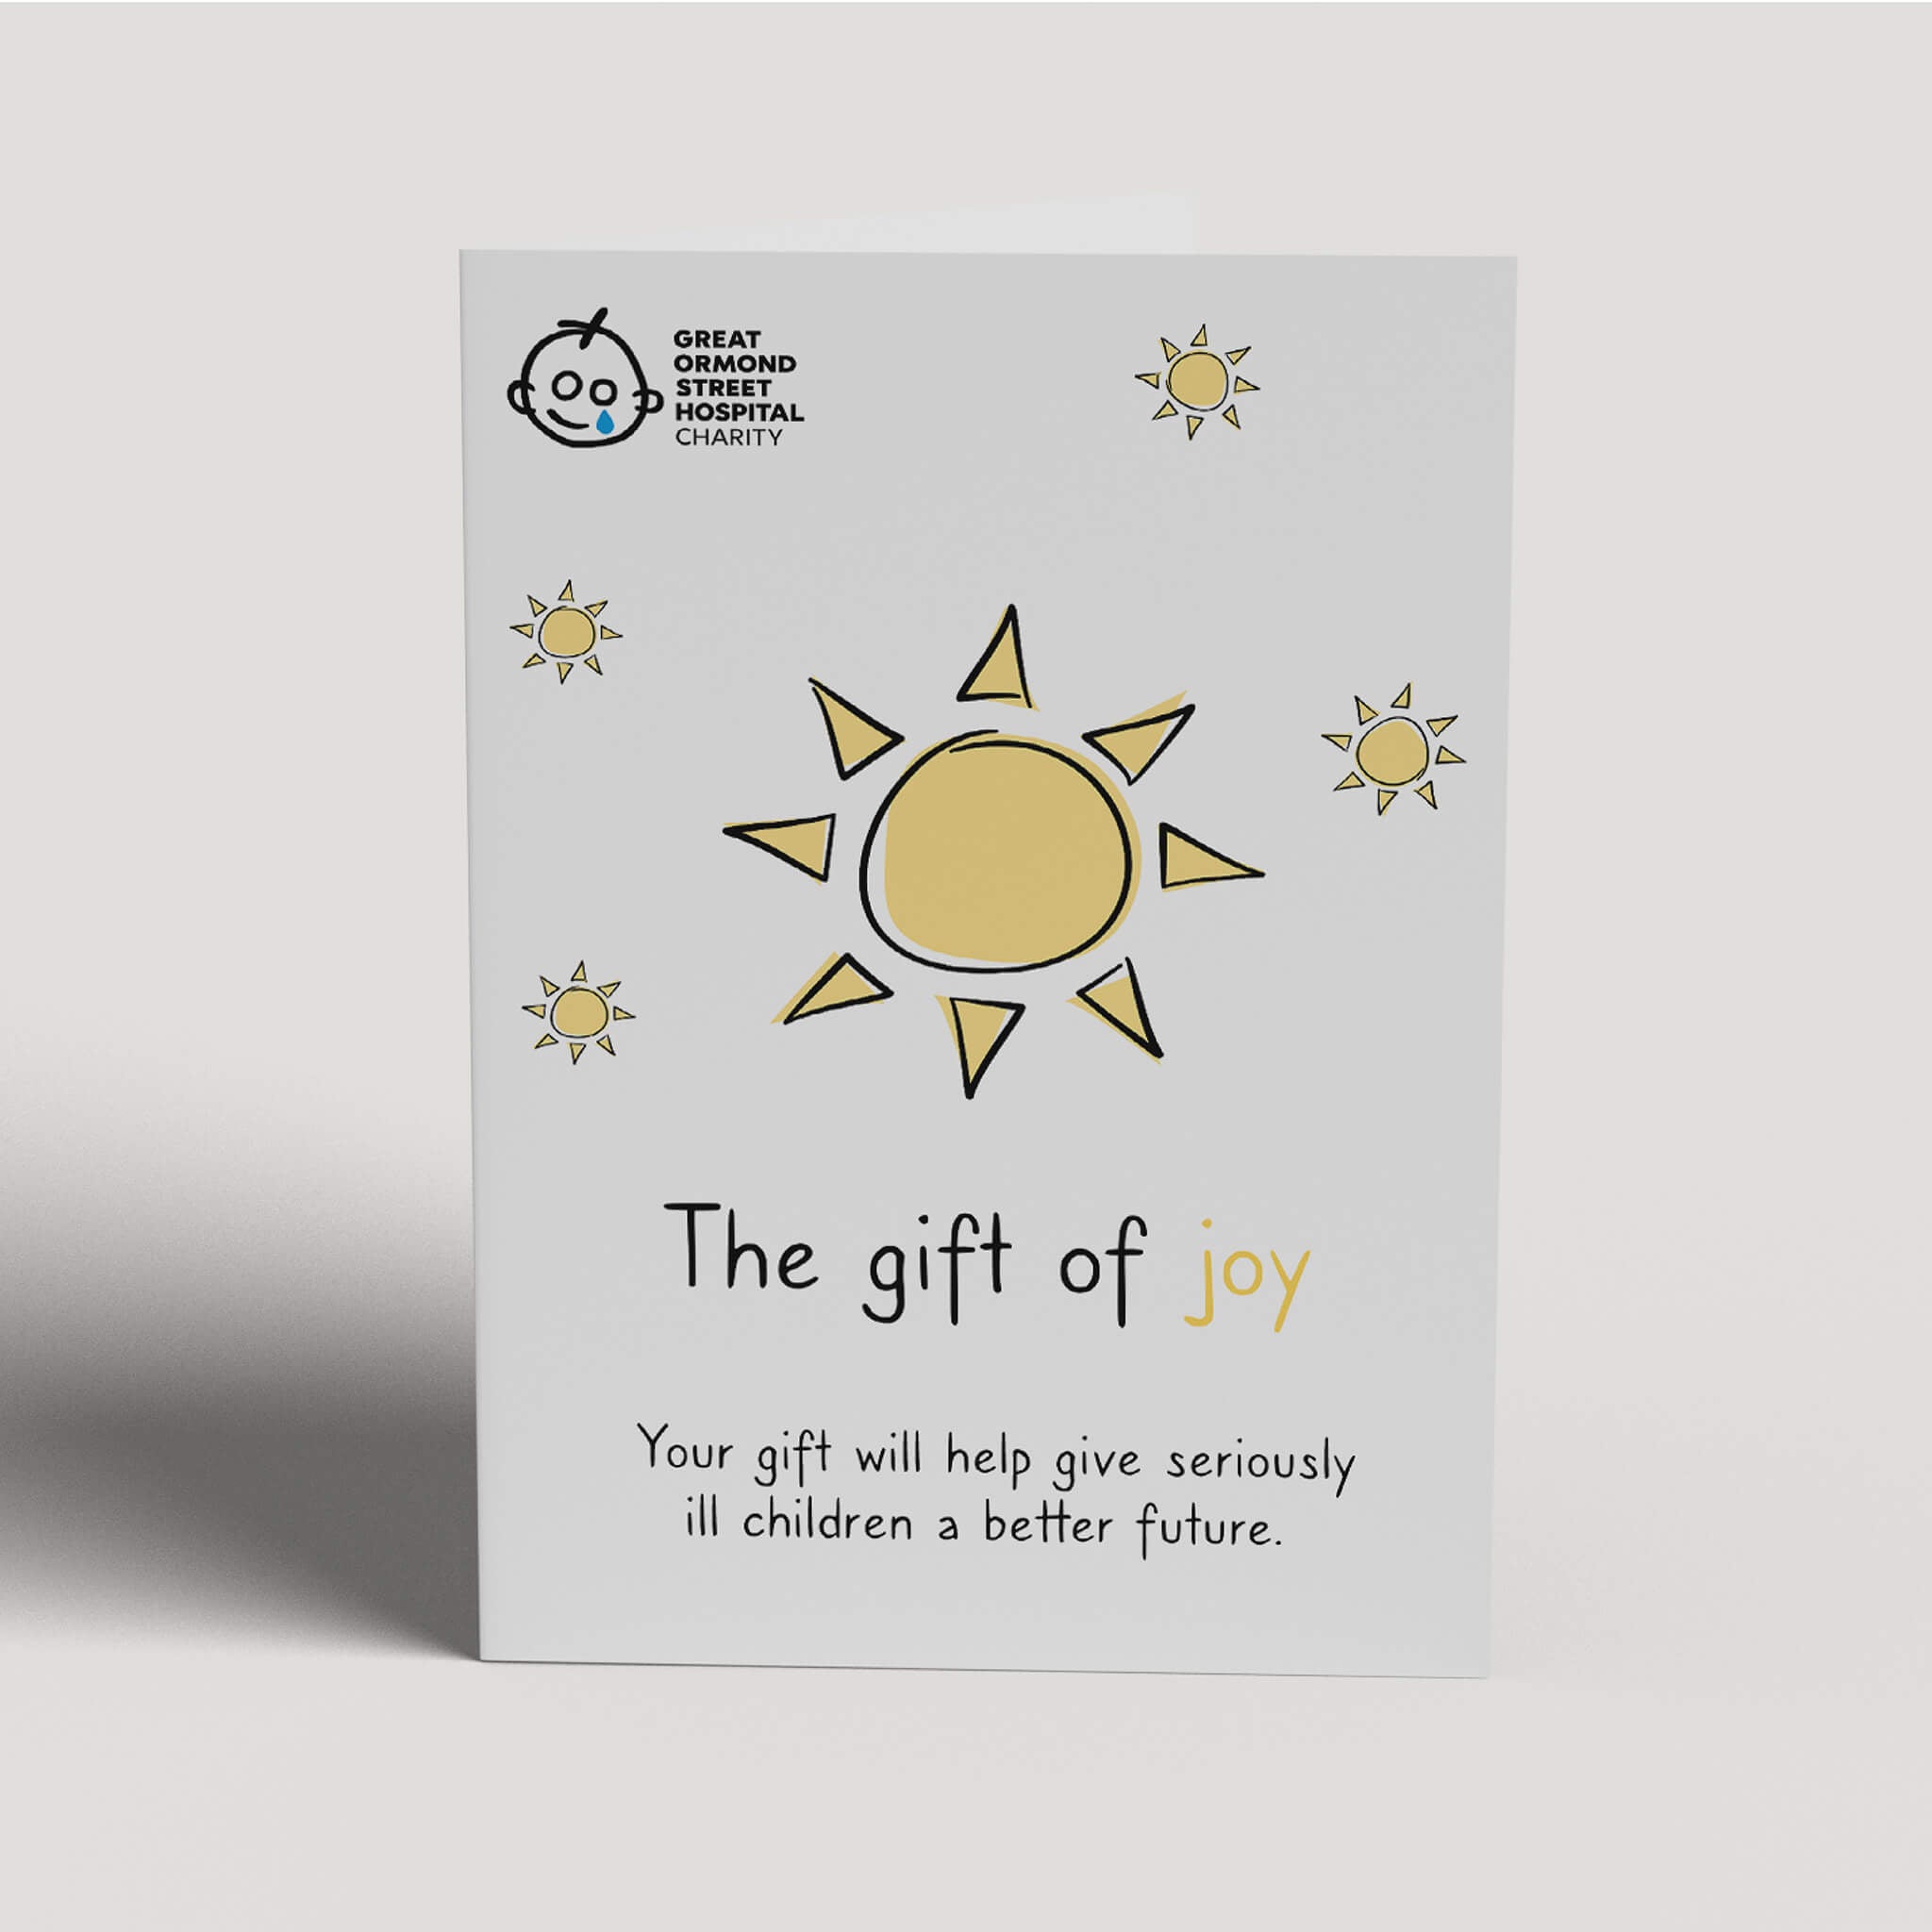 GOSH_Charity_alternative_gift_card_for_hospital_entertainment_donations